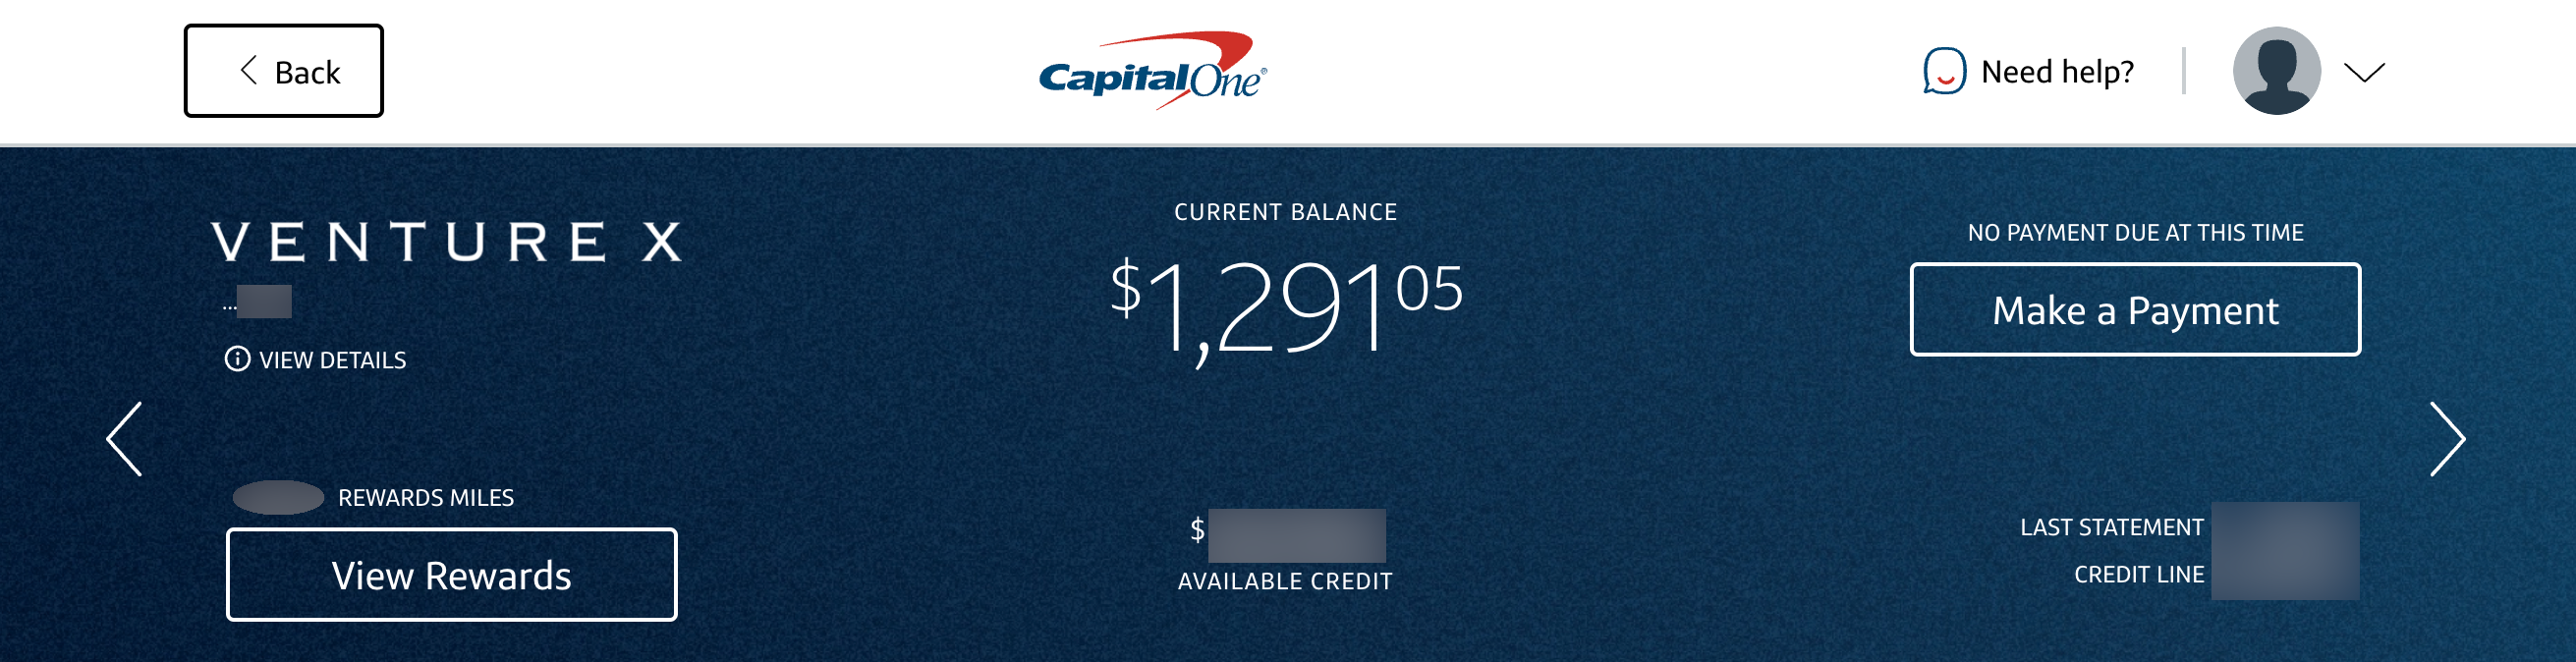 Online account summary for the Capital One Venture X